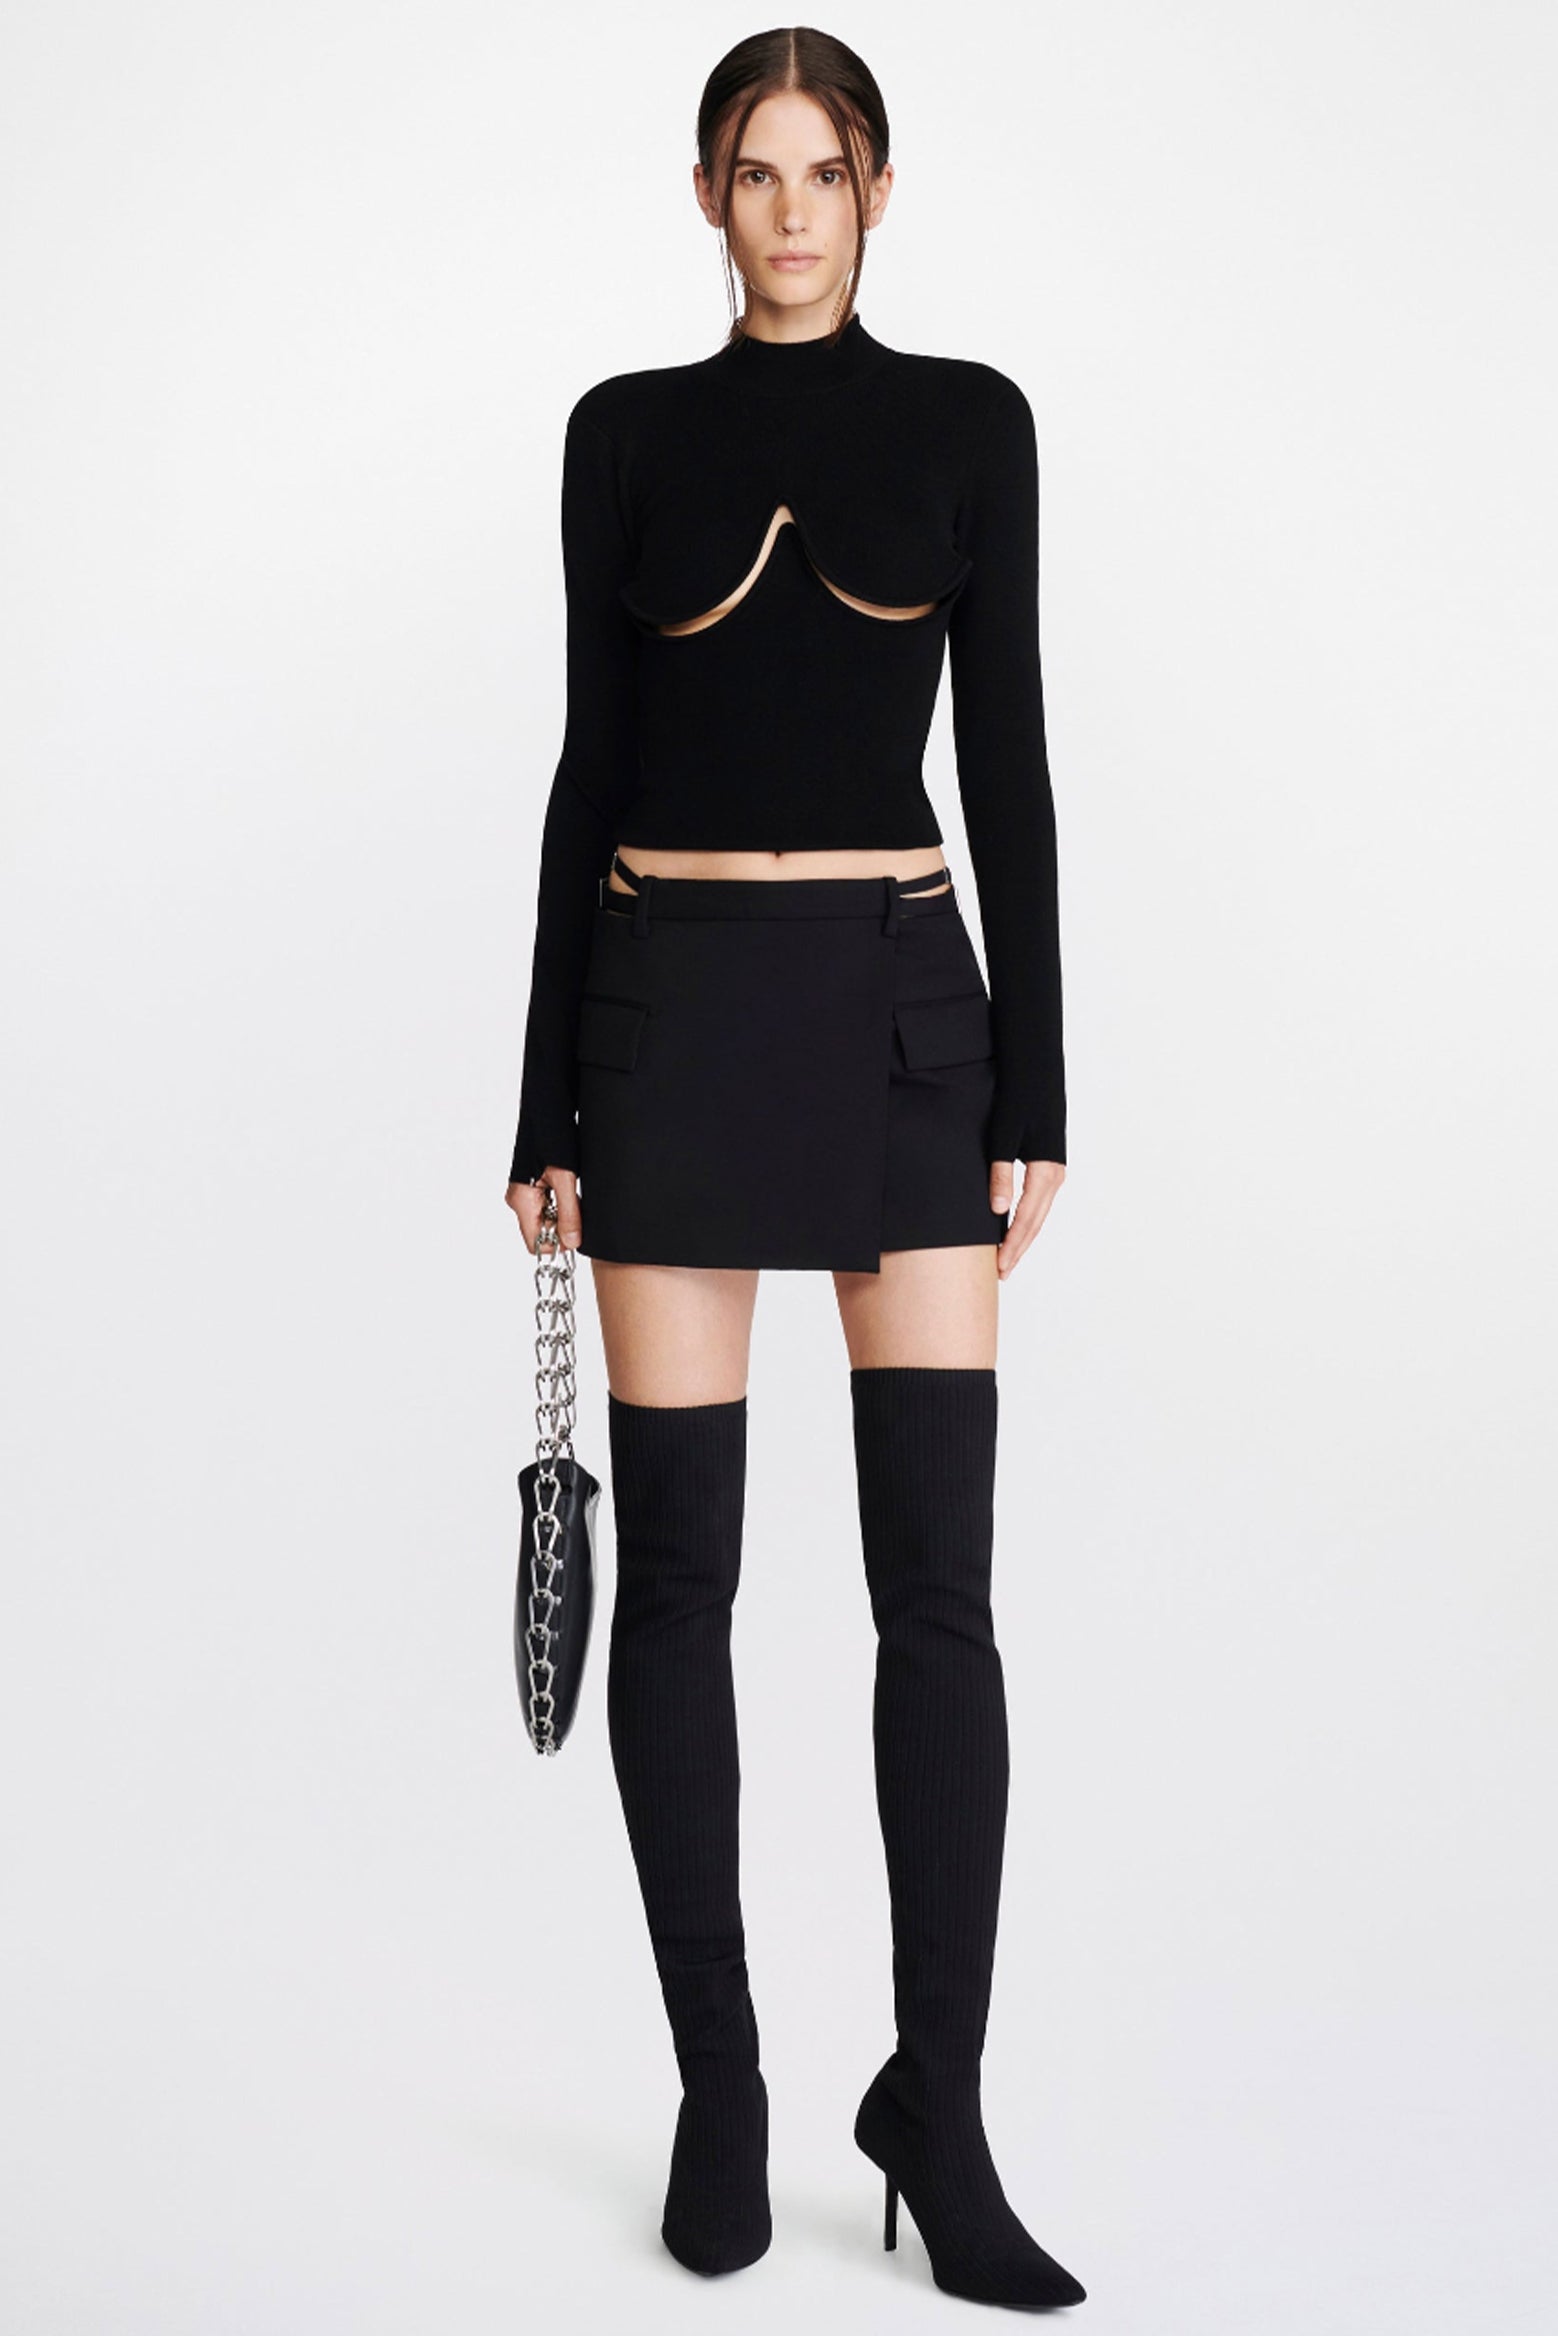 The Dion Lee Lingerie Wool Mini Skirt in Black available at The New Trend Australia